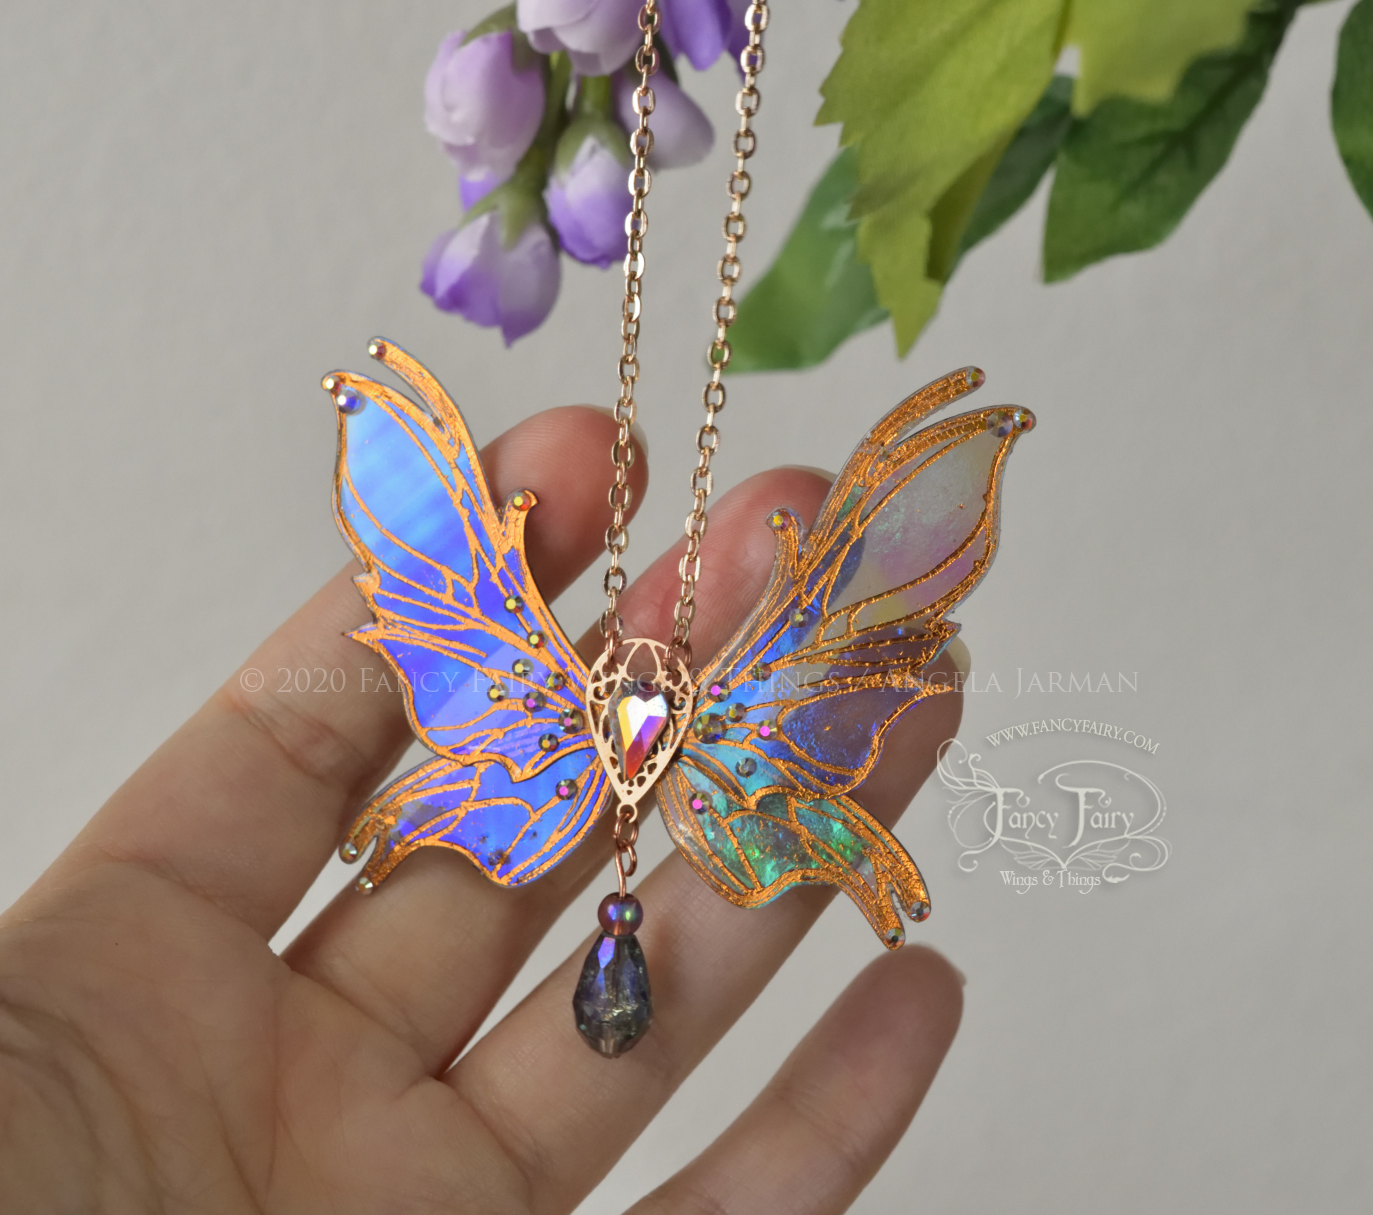 'Nightshade' 3 and 1/2 inch Fairy Wing Necklace in Dark Crystal with Copper Accents